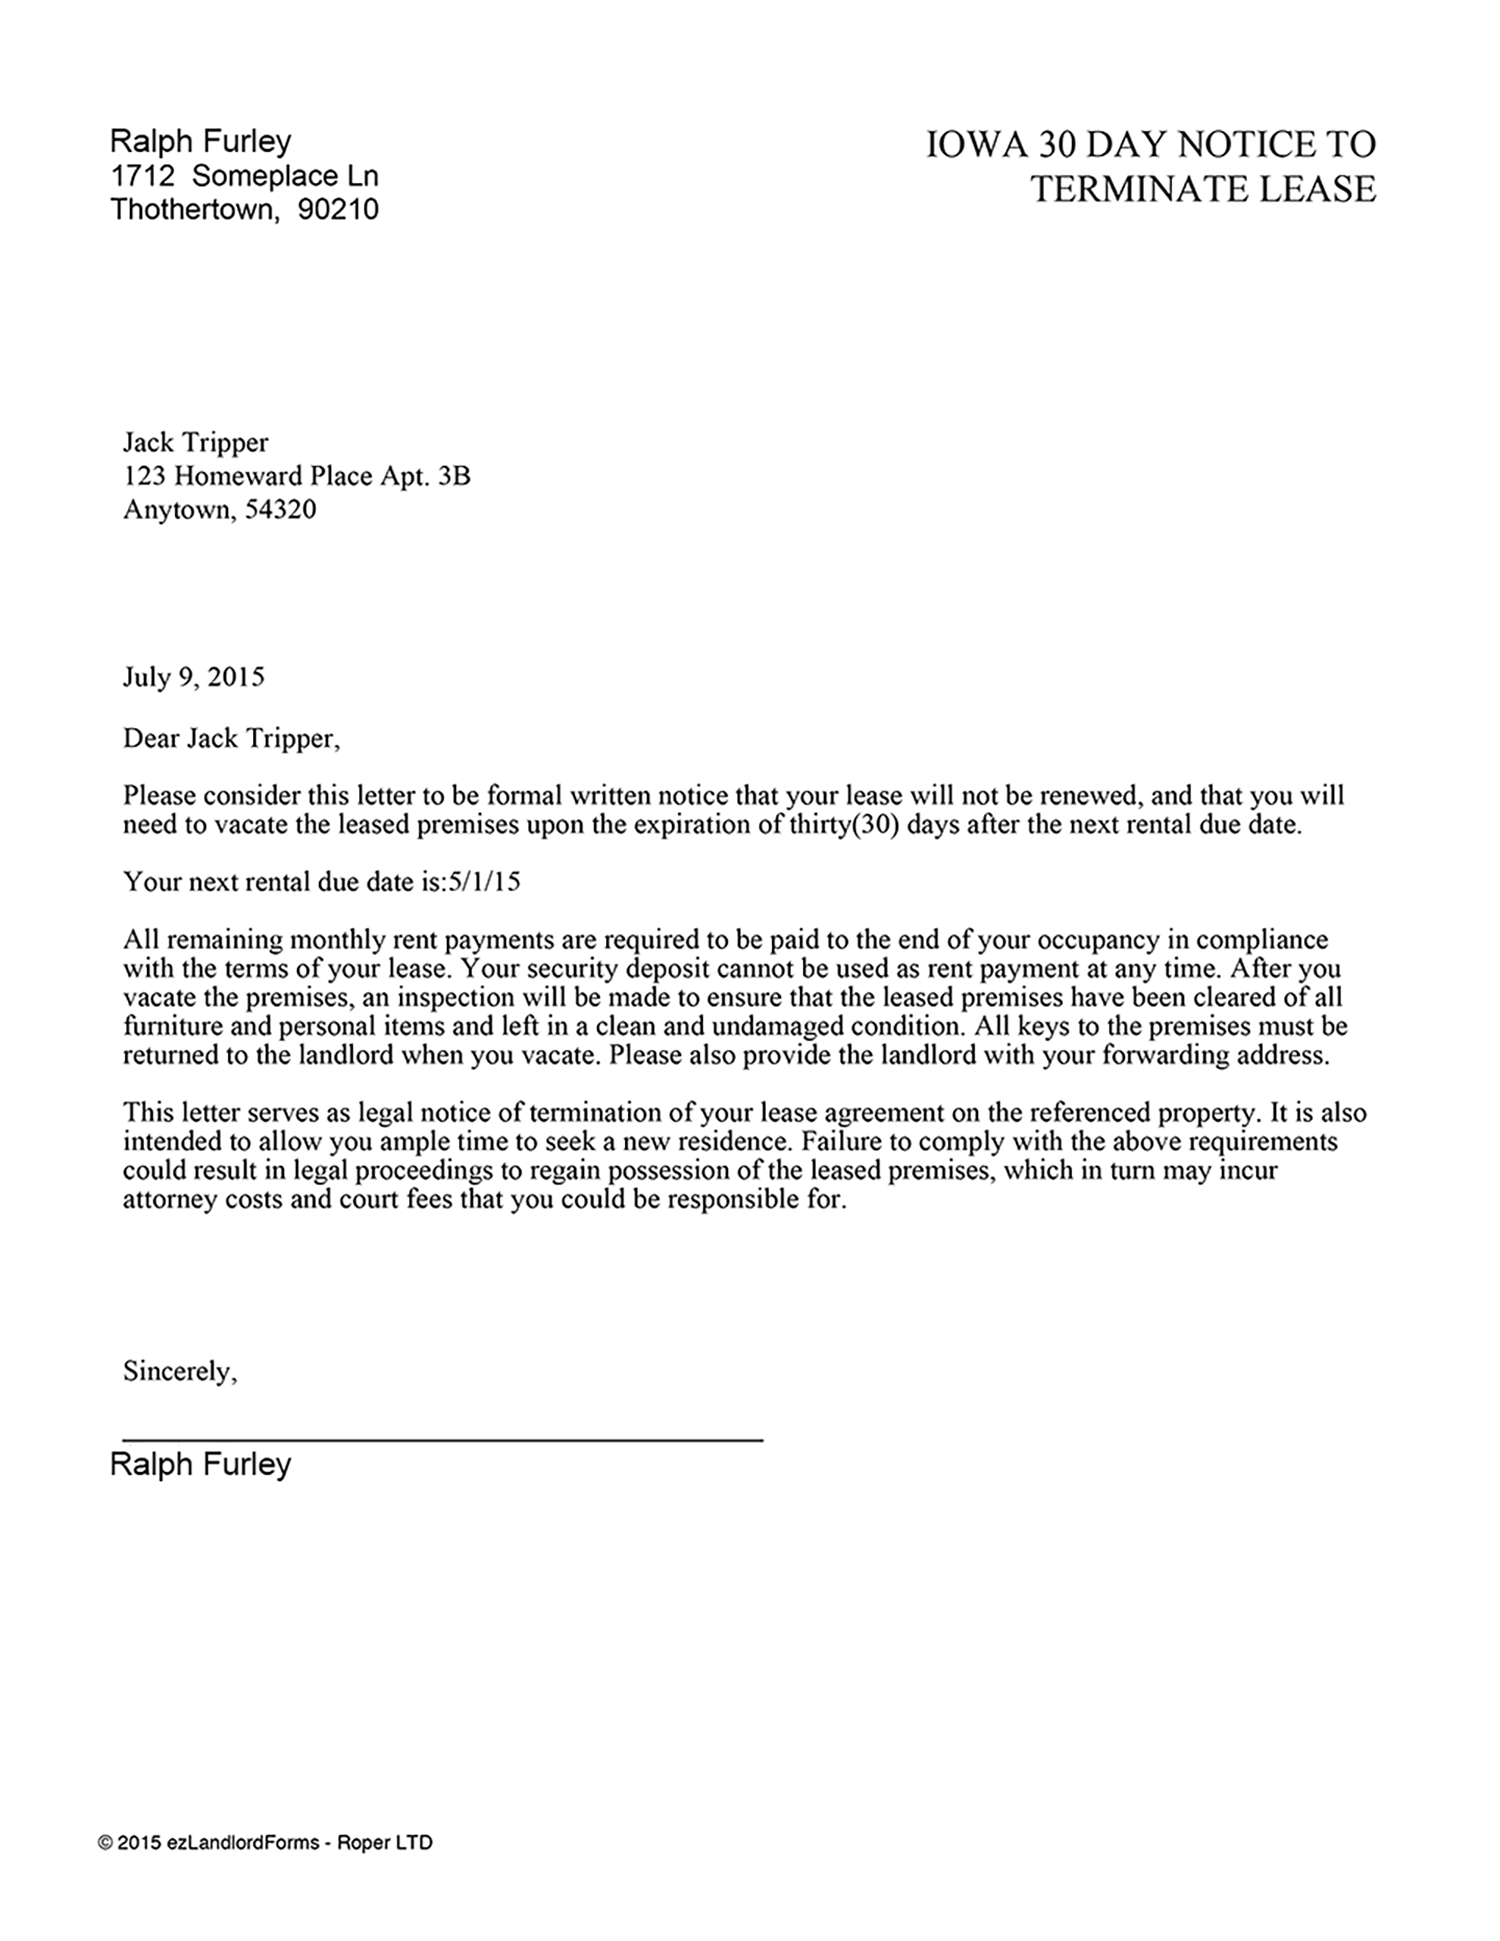 Sample Letter To Terminate Lease Agreement from www.ezlandlordforms.com